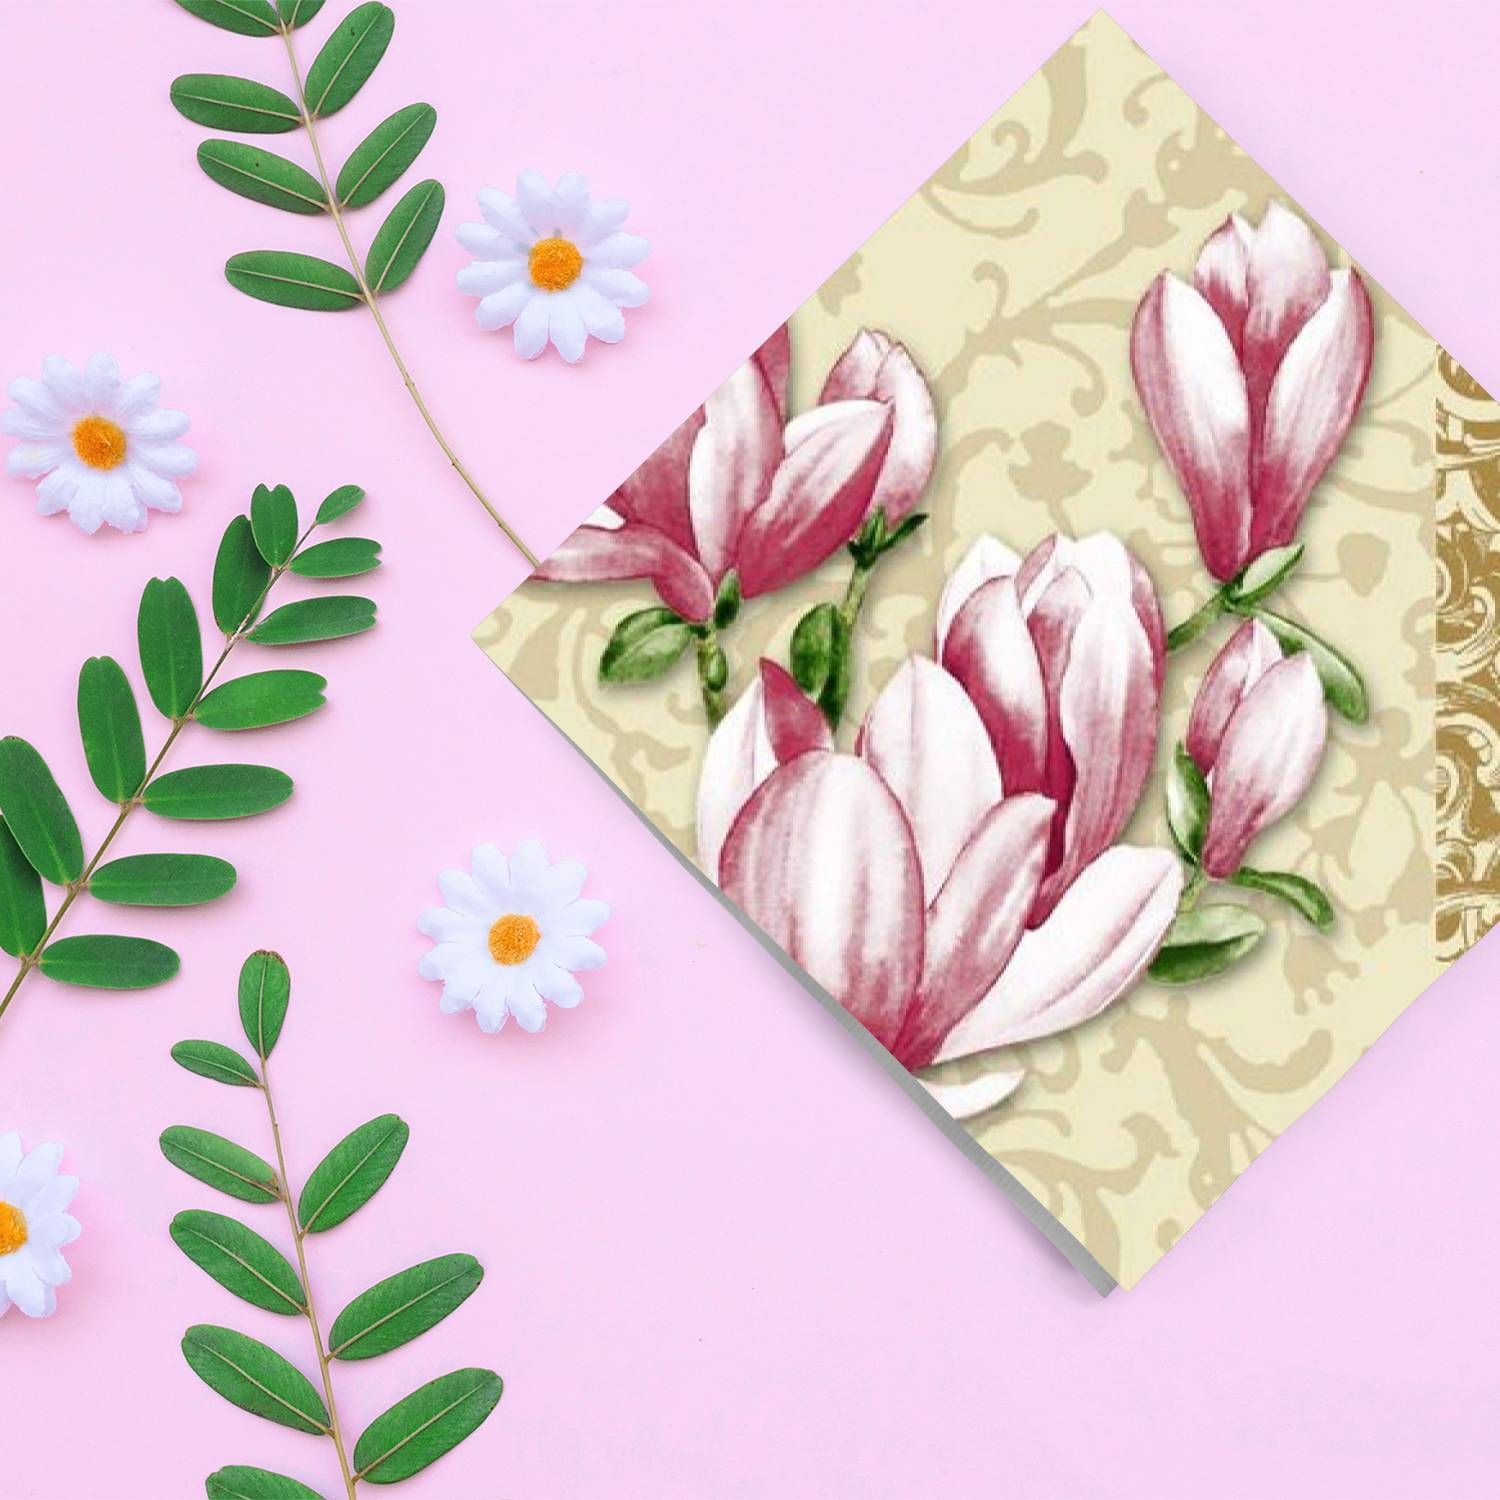 Timeless Tulip 2 Disposable Lunch Paper Napkins 20 Ct Tablesettings Nicole Fantini Collection   